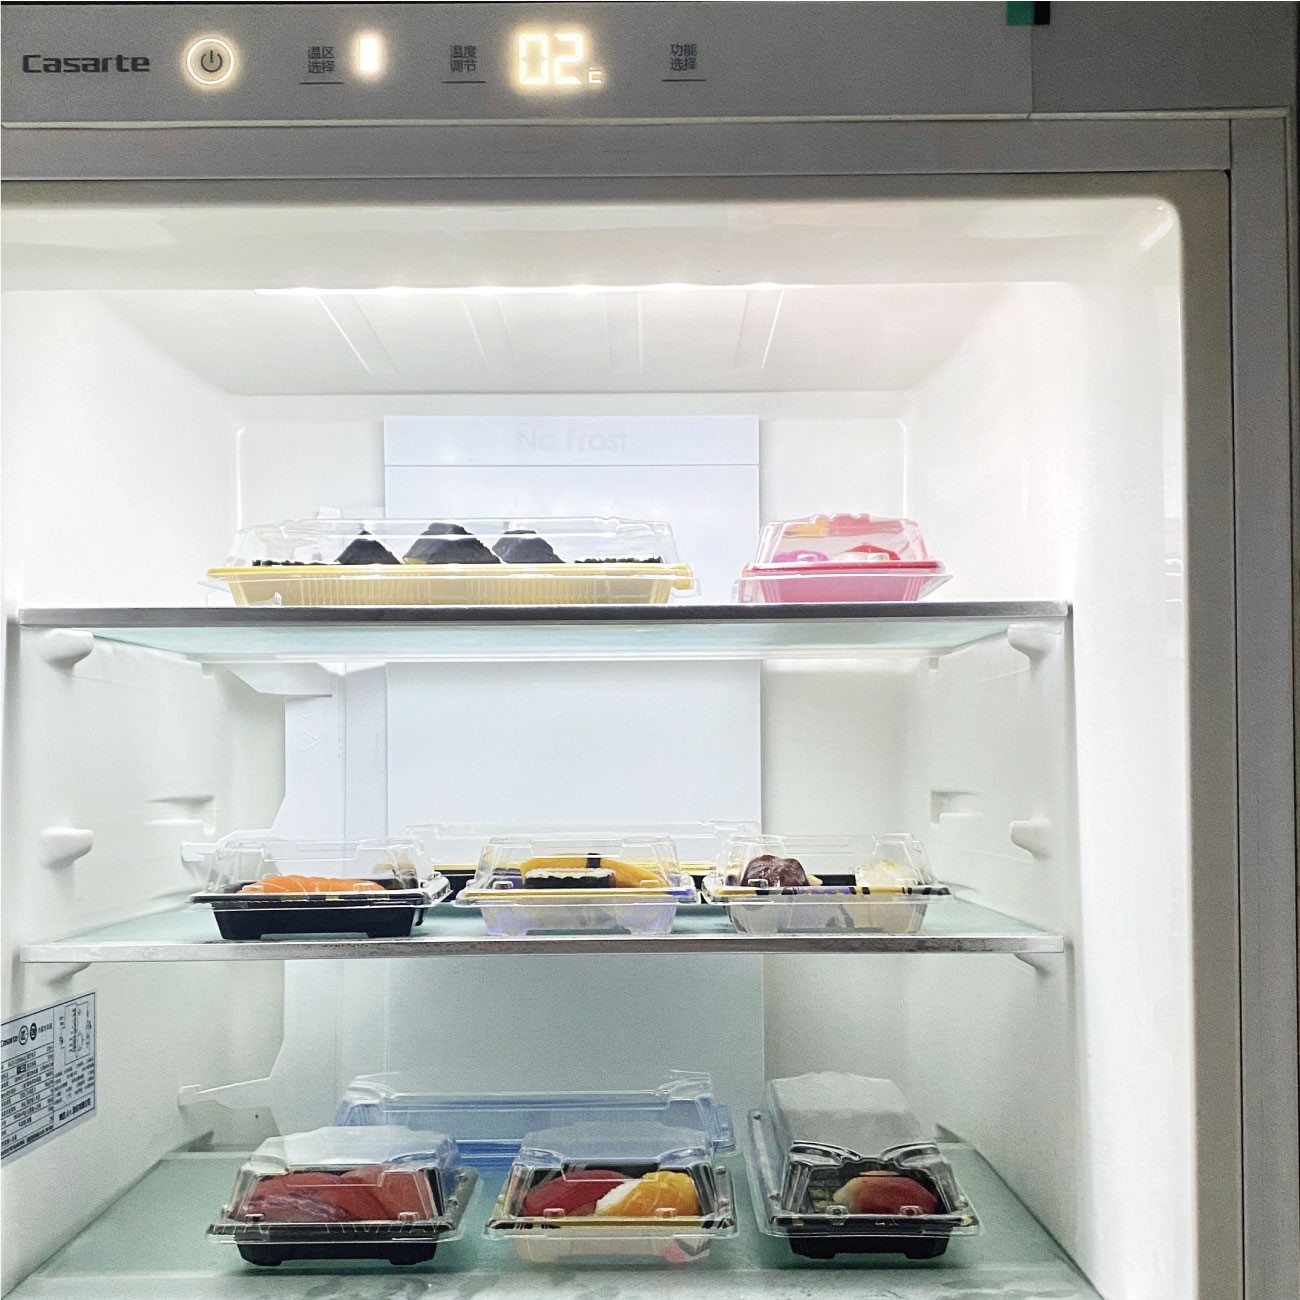 There are some sushi plates WL-0.1 in the refrigerator, which can be used for refrigeration.